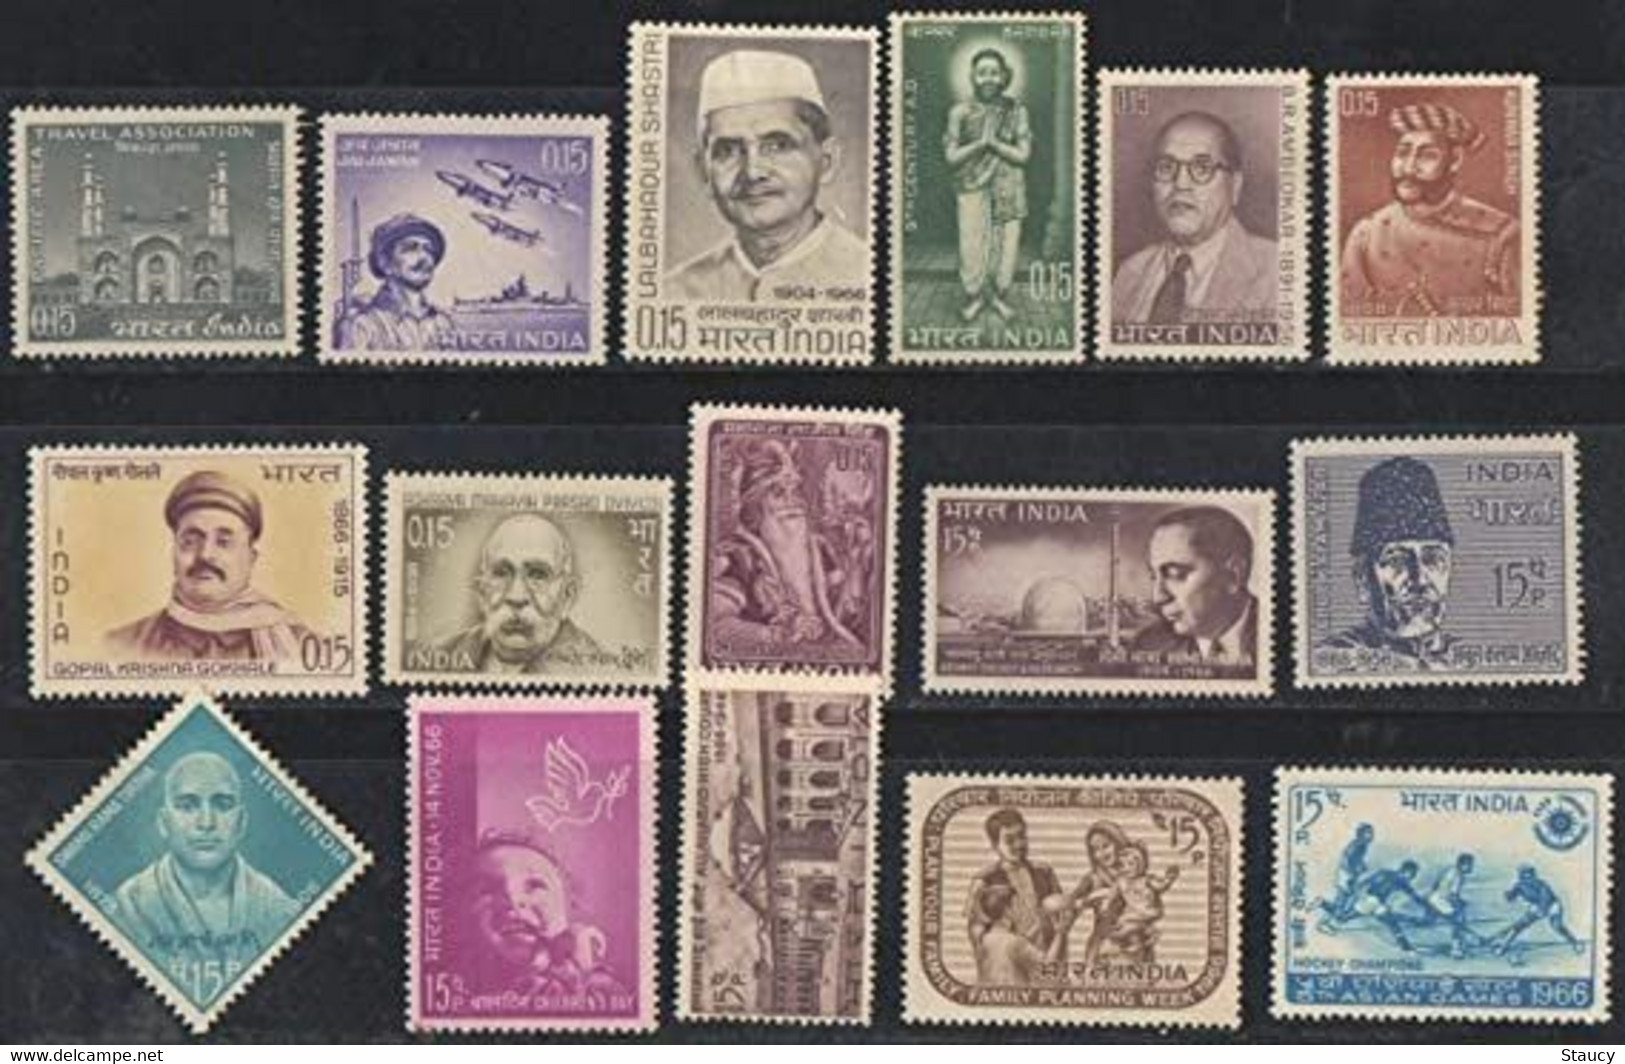 India 1966 Complete Year Pack / Set / Collection Total 16 Stamps (No Missing) MNH As Per Scan - Volledig Jaar